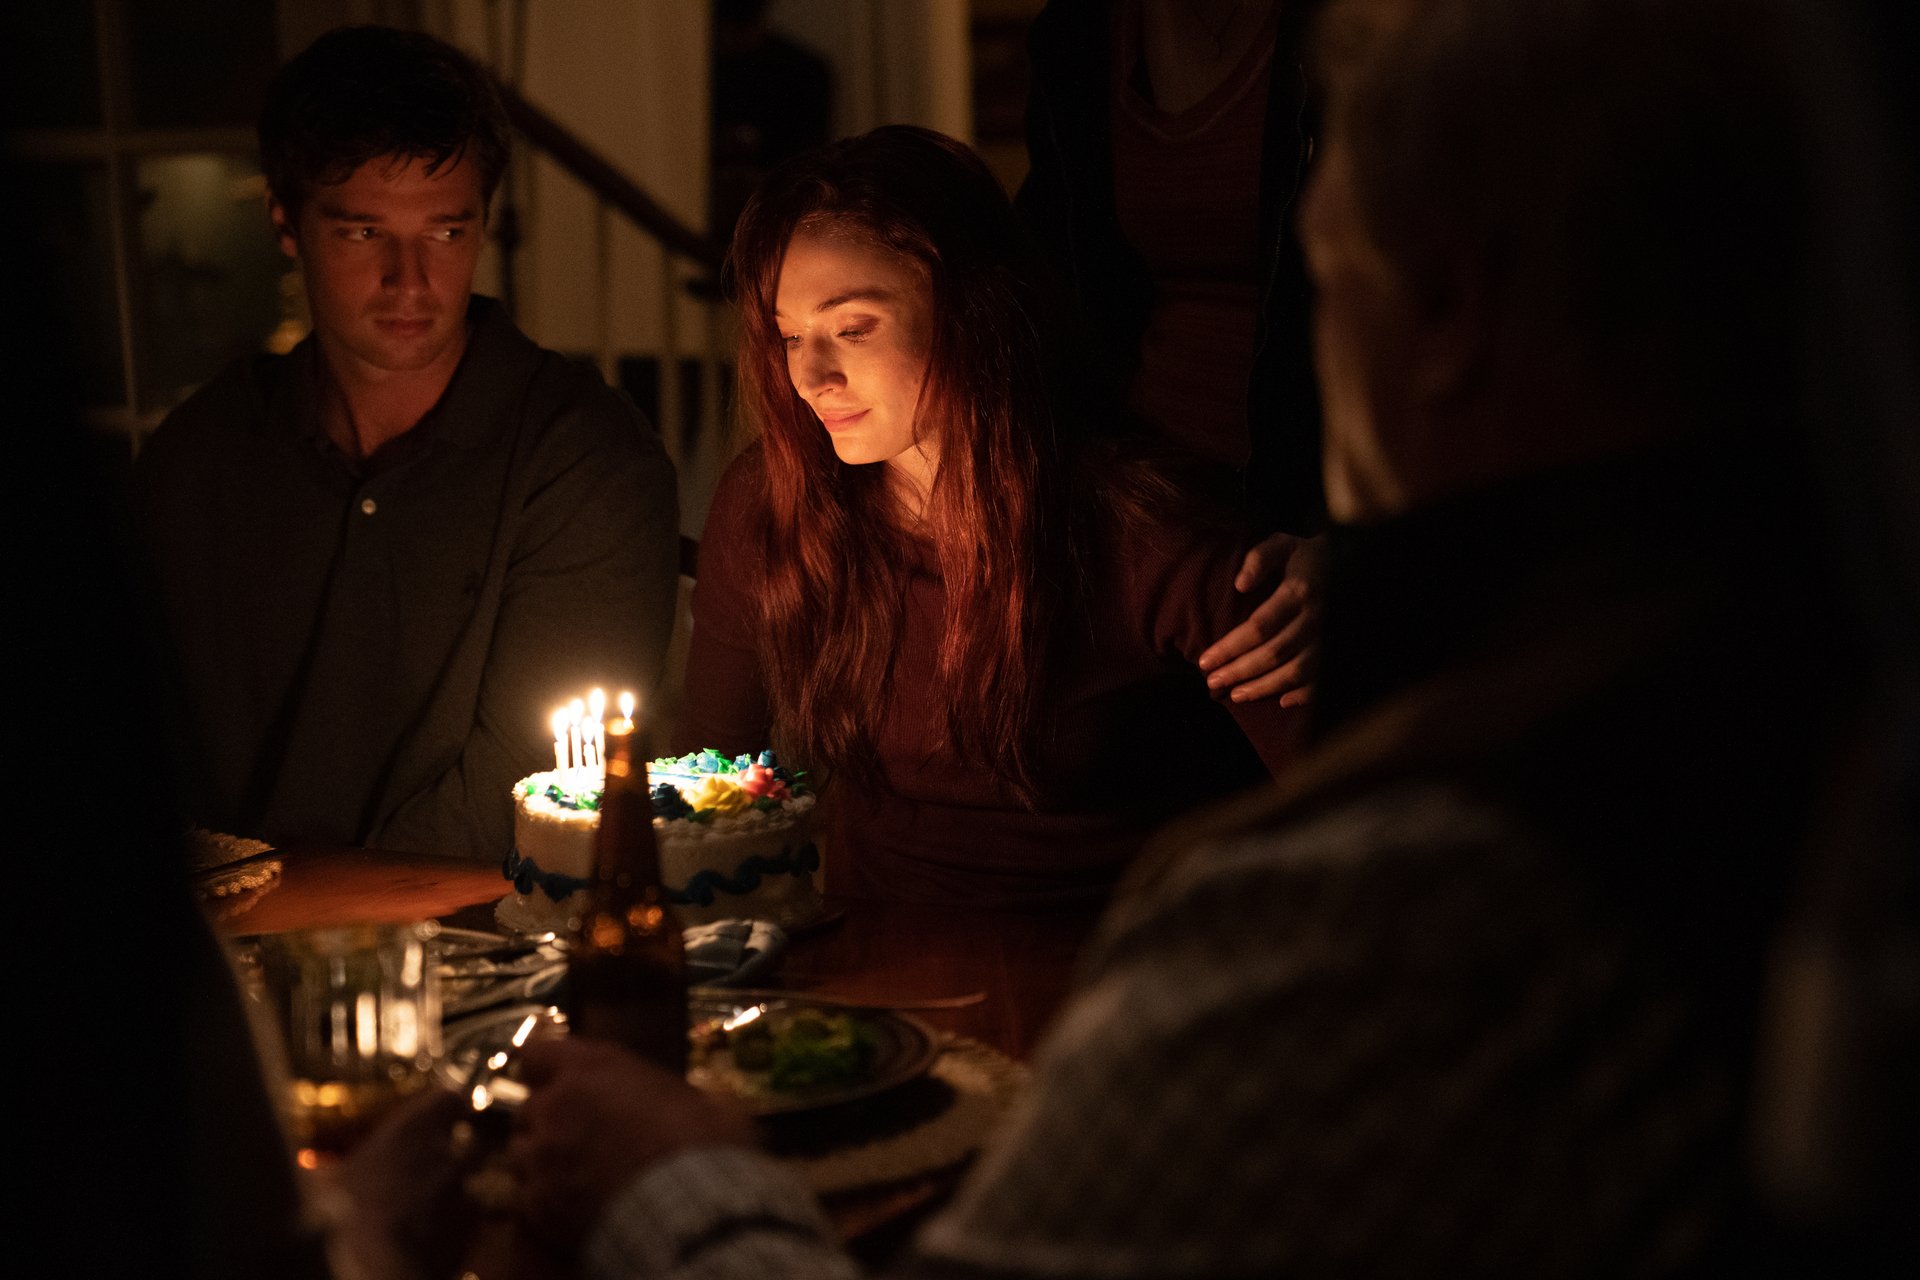 Patrick Schwarzenegger and Sophie Turner as the Peterson children in HBO Max's 'The Staircase'